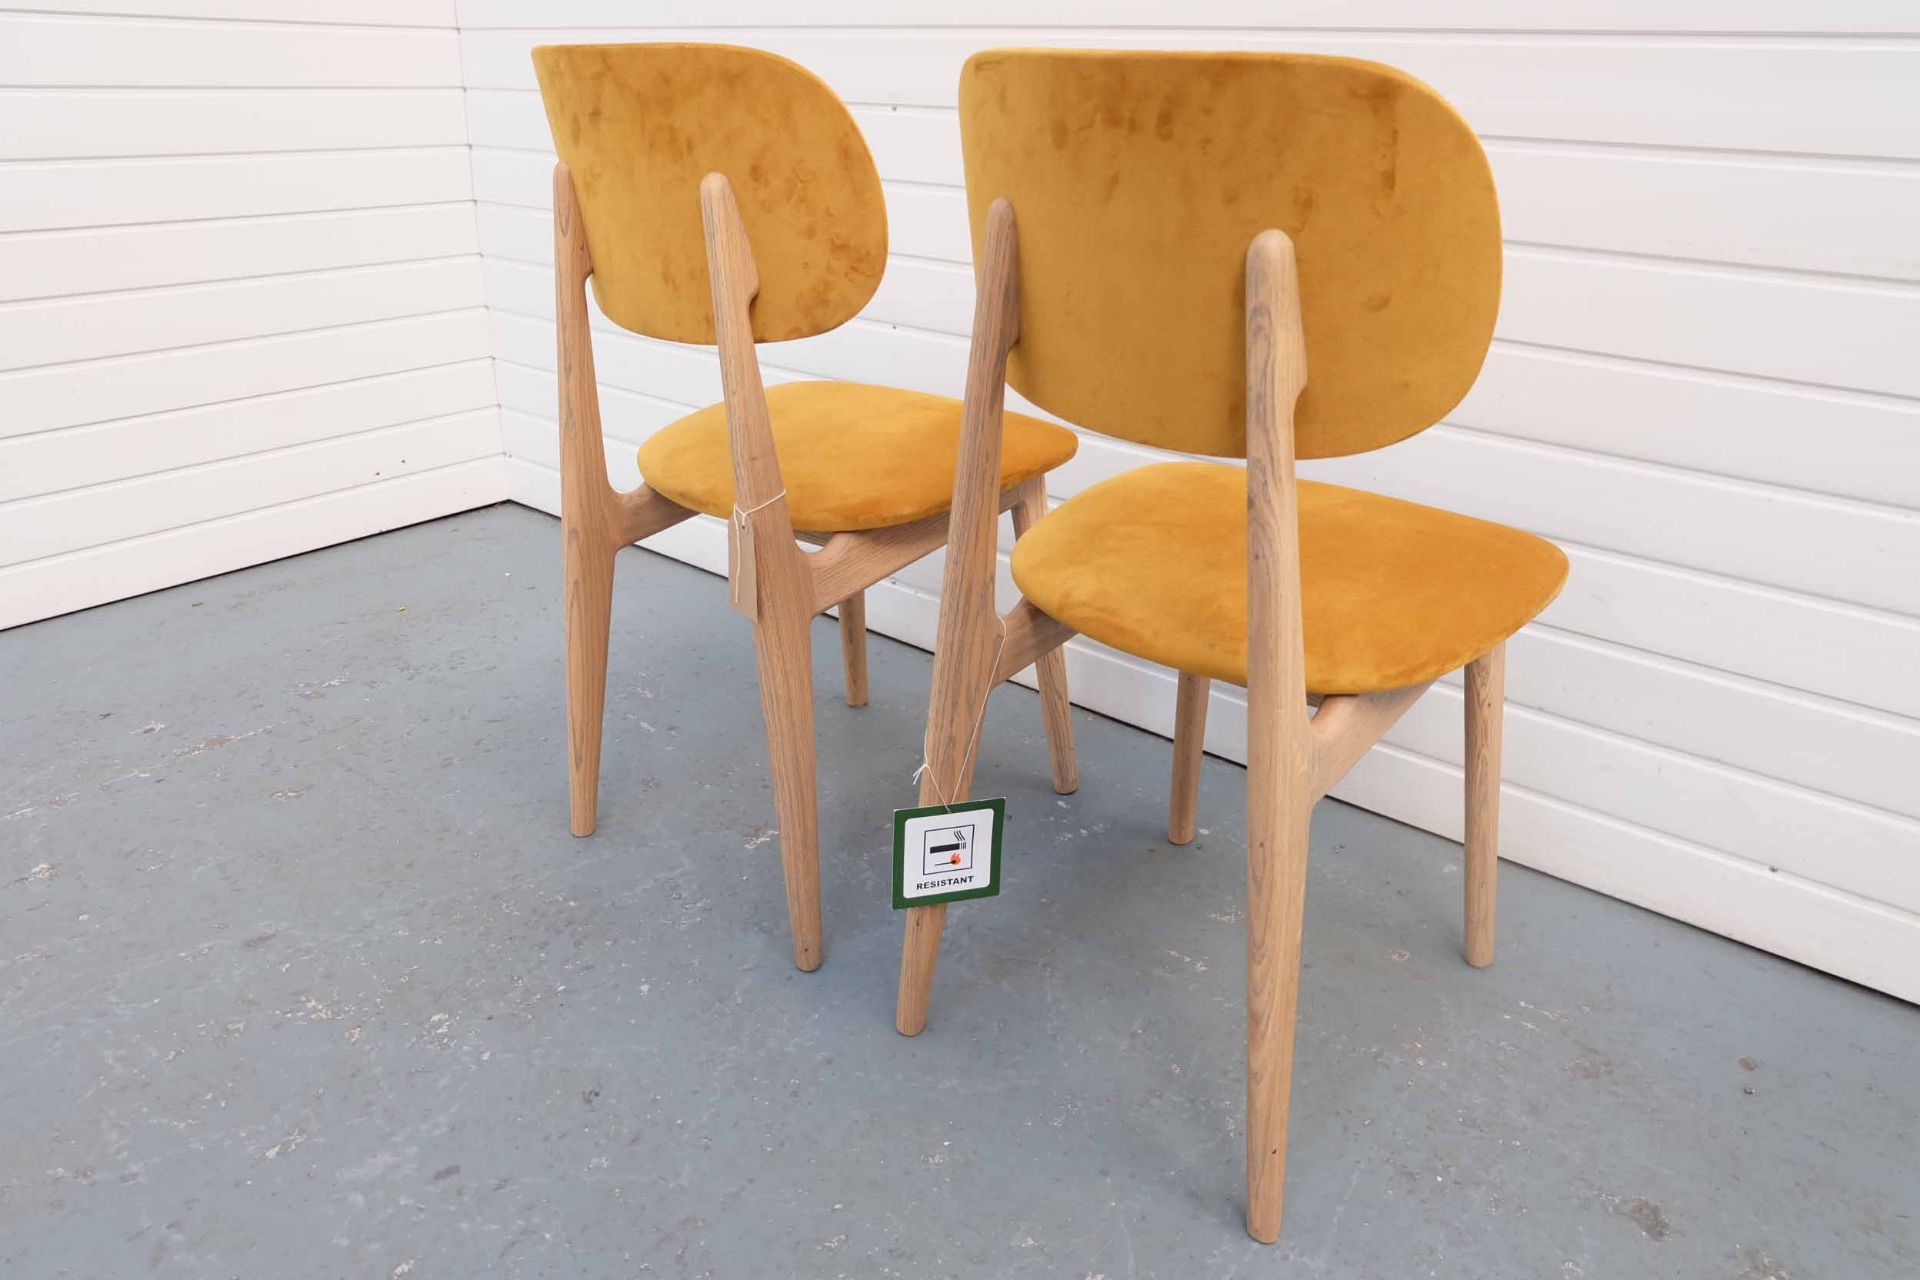 Pair of Carton Furniture 'Bari' Dining Chairs. Upholstered Seat and Back in Mustard Velvet. - Image 6 of 6